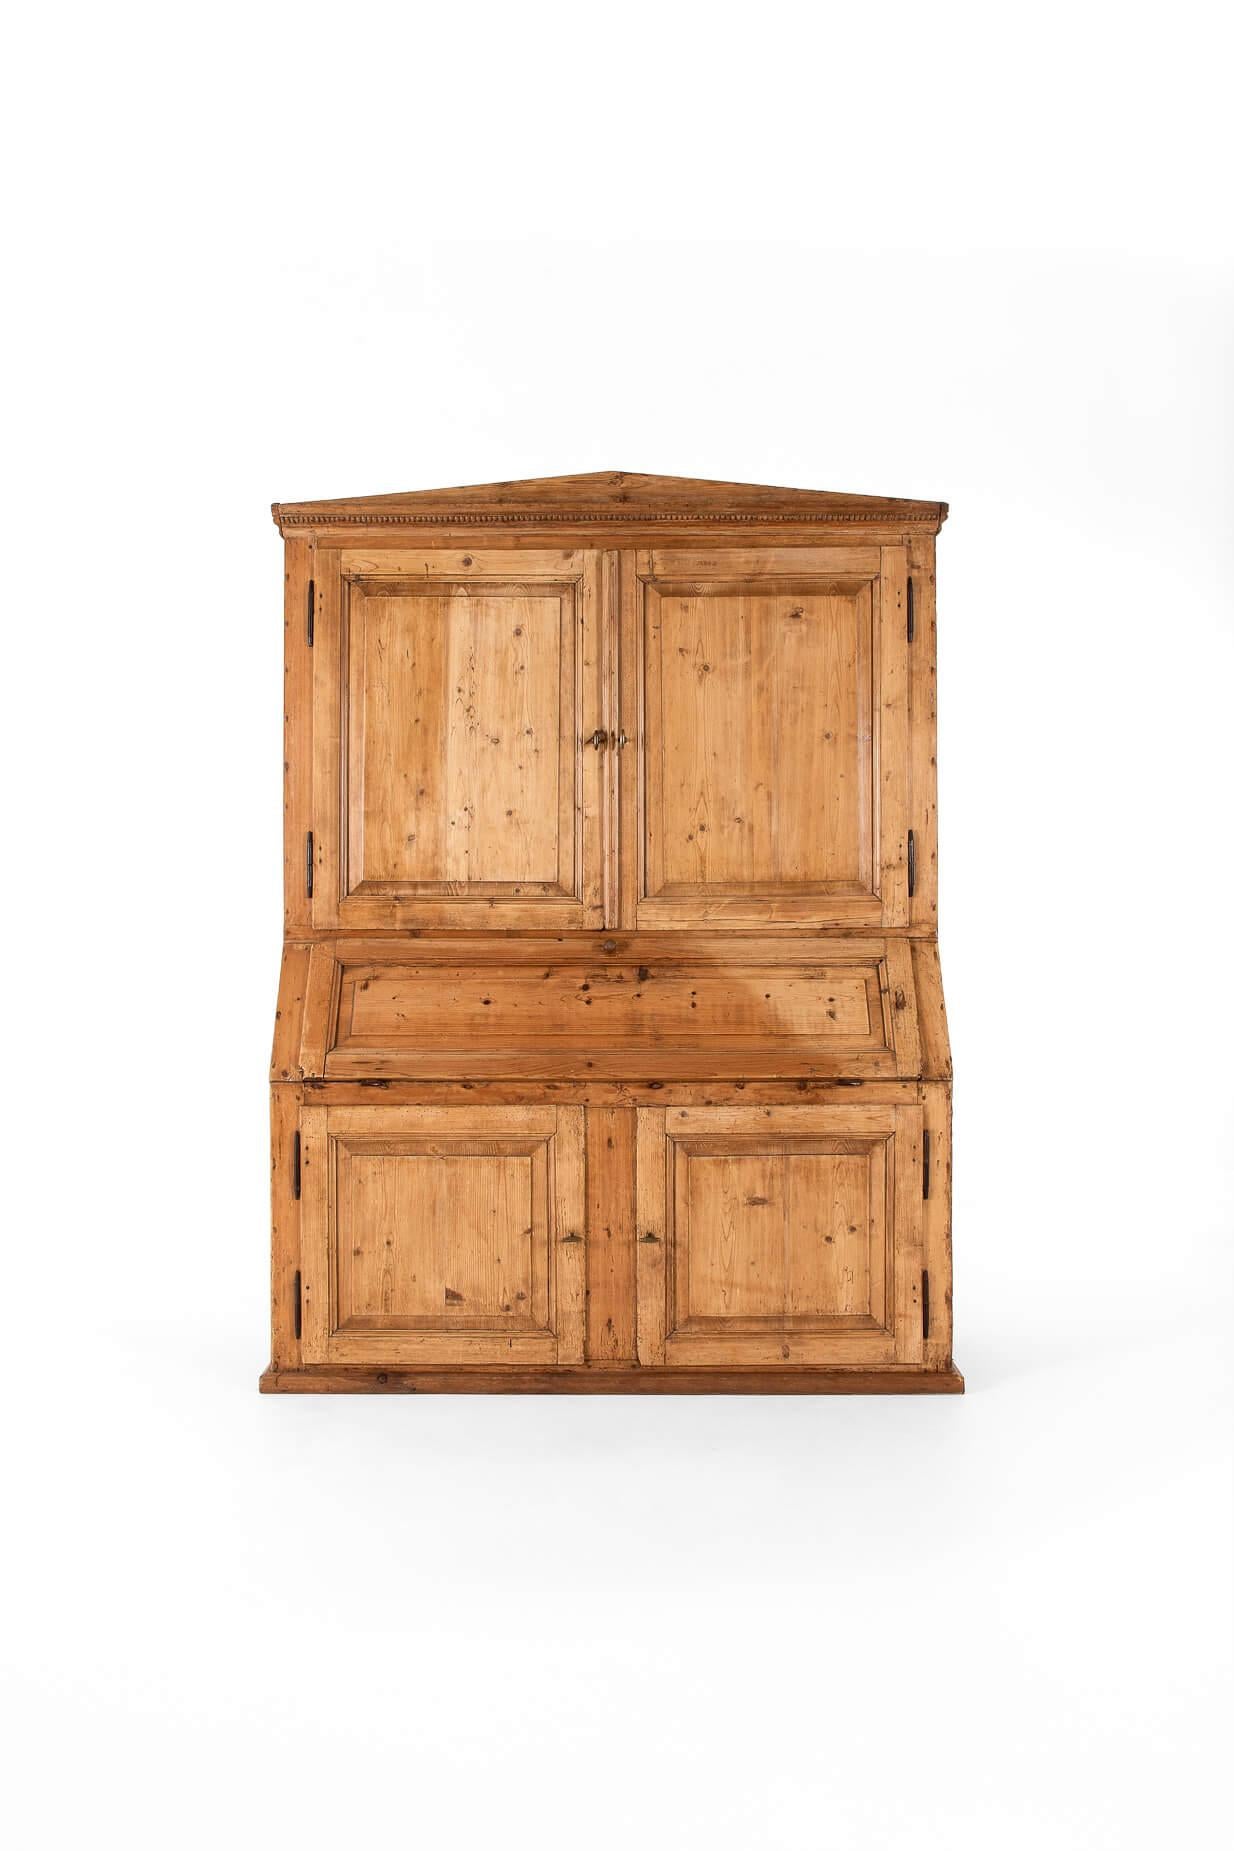 A striking 19th-century pine dresser with an unusual central secretaire.

The top pair of cupboards open to reveal two generous shelves, ideal for books or kitchenalia, with a decorative triangular cornice surround.

The central bureau or secretaire